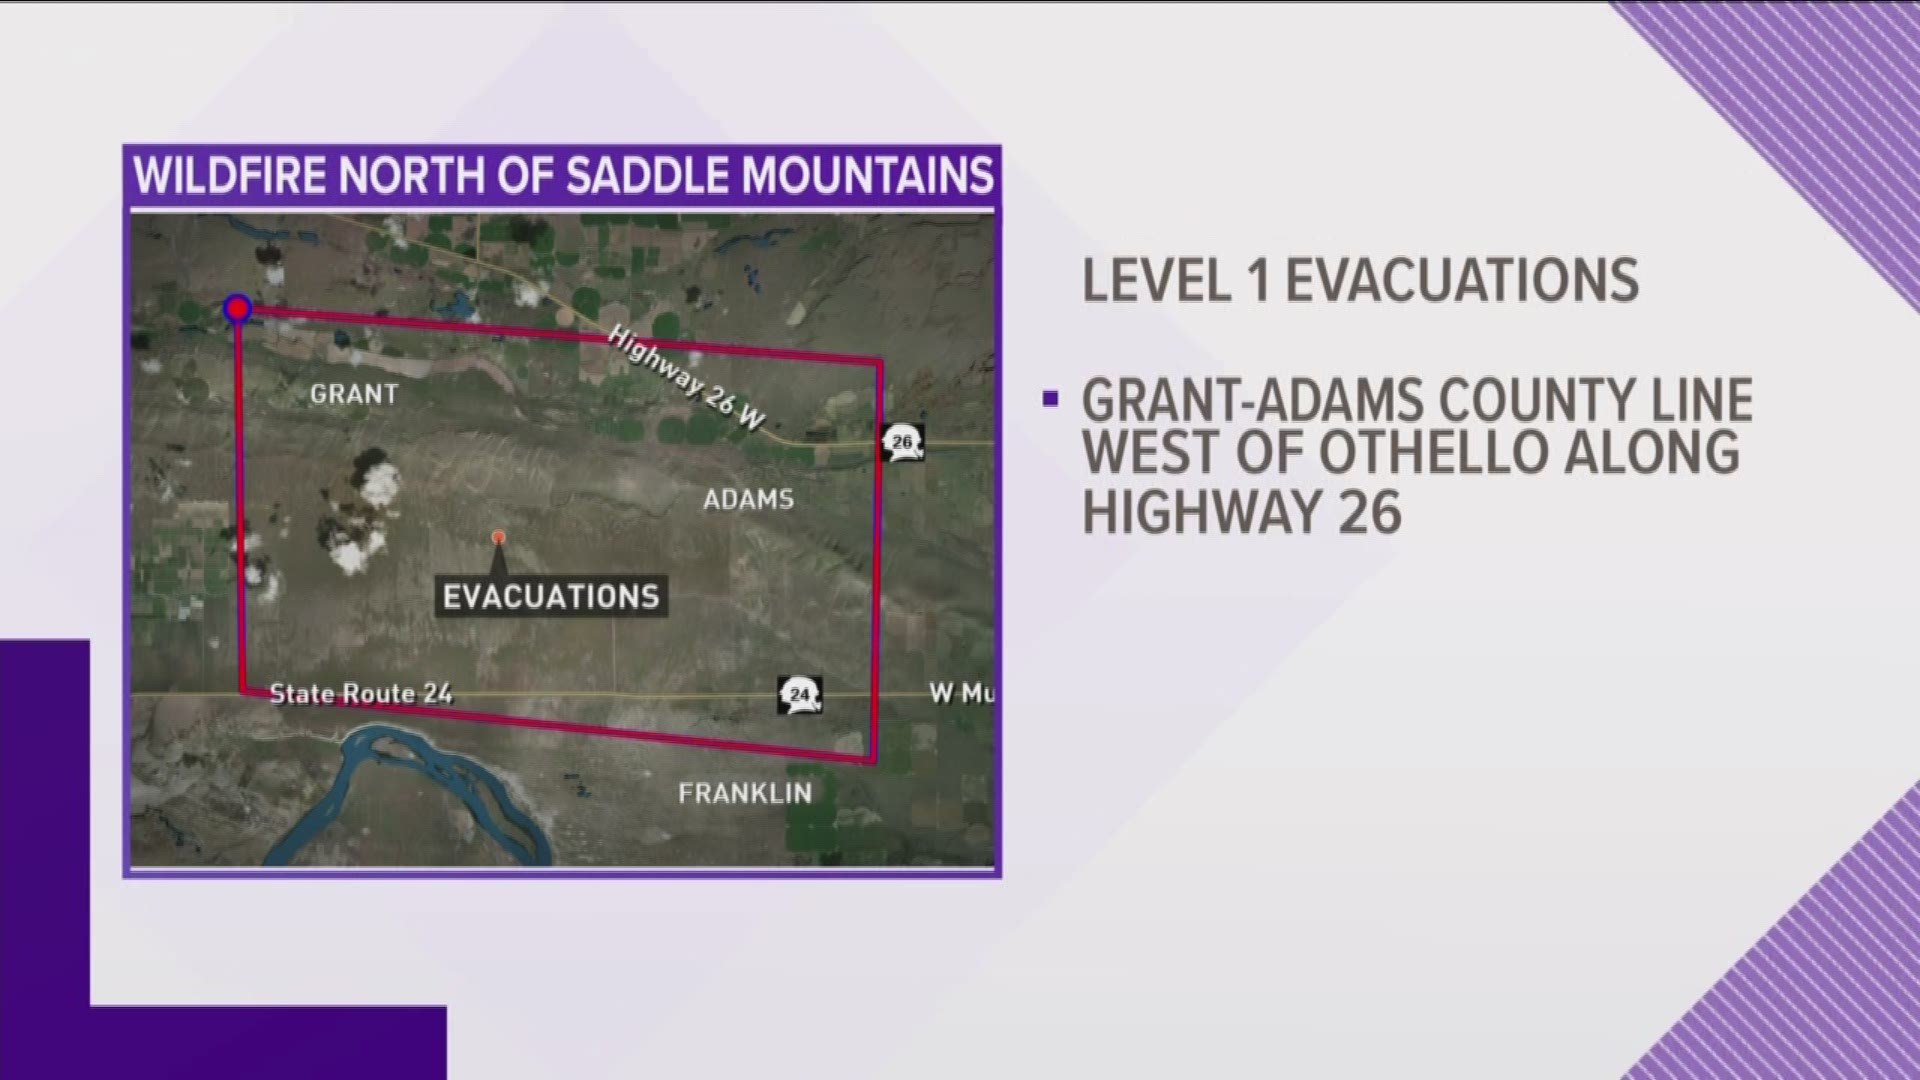 Level 1 evacuations for fire in Grant Co.